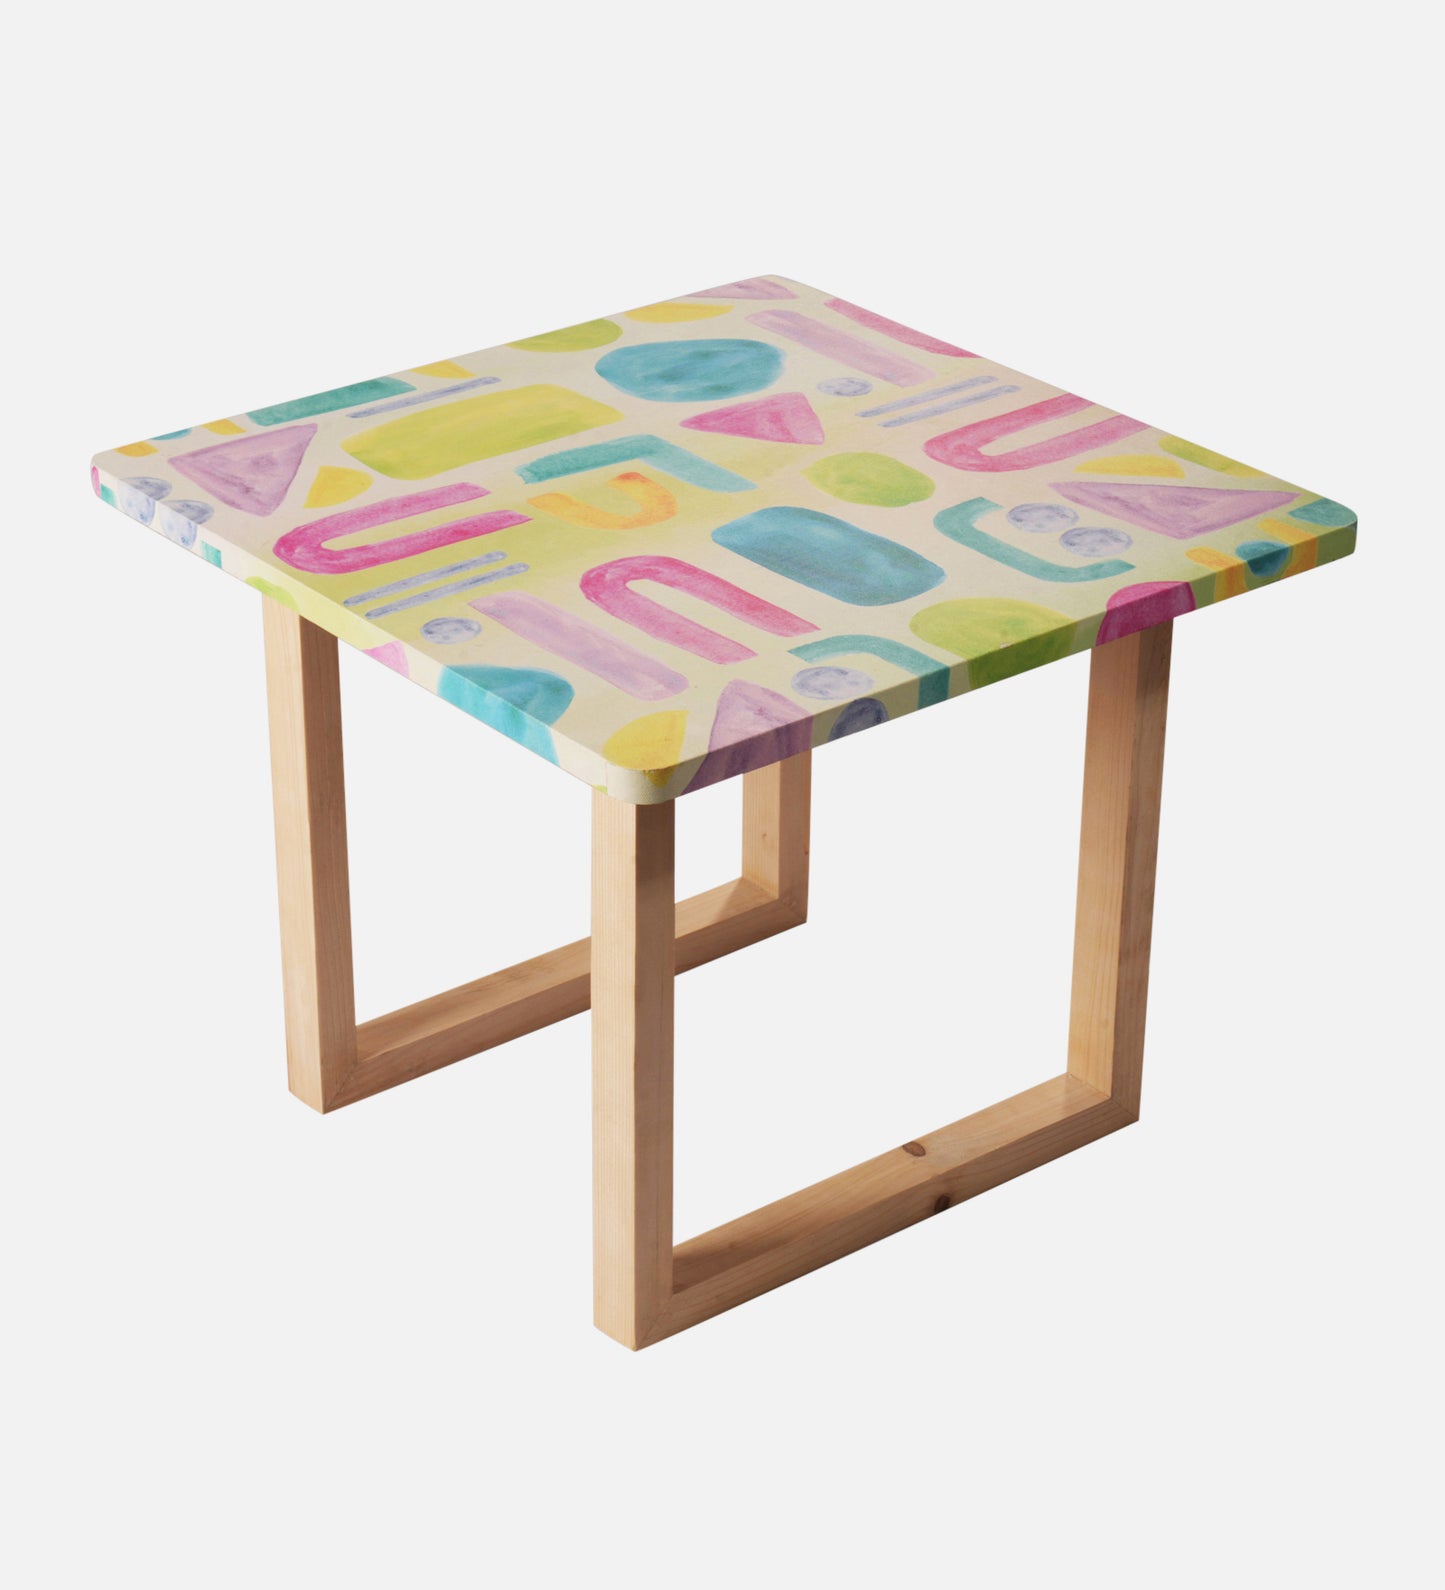 Tiny Doodles Square Coffee Tables, Wooden Tables, Coffee Tables, Center Tables, Living Room Decor by A Tiny Mistake